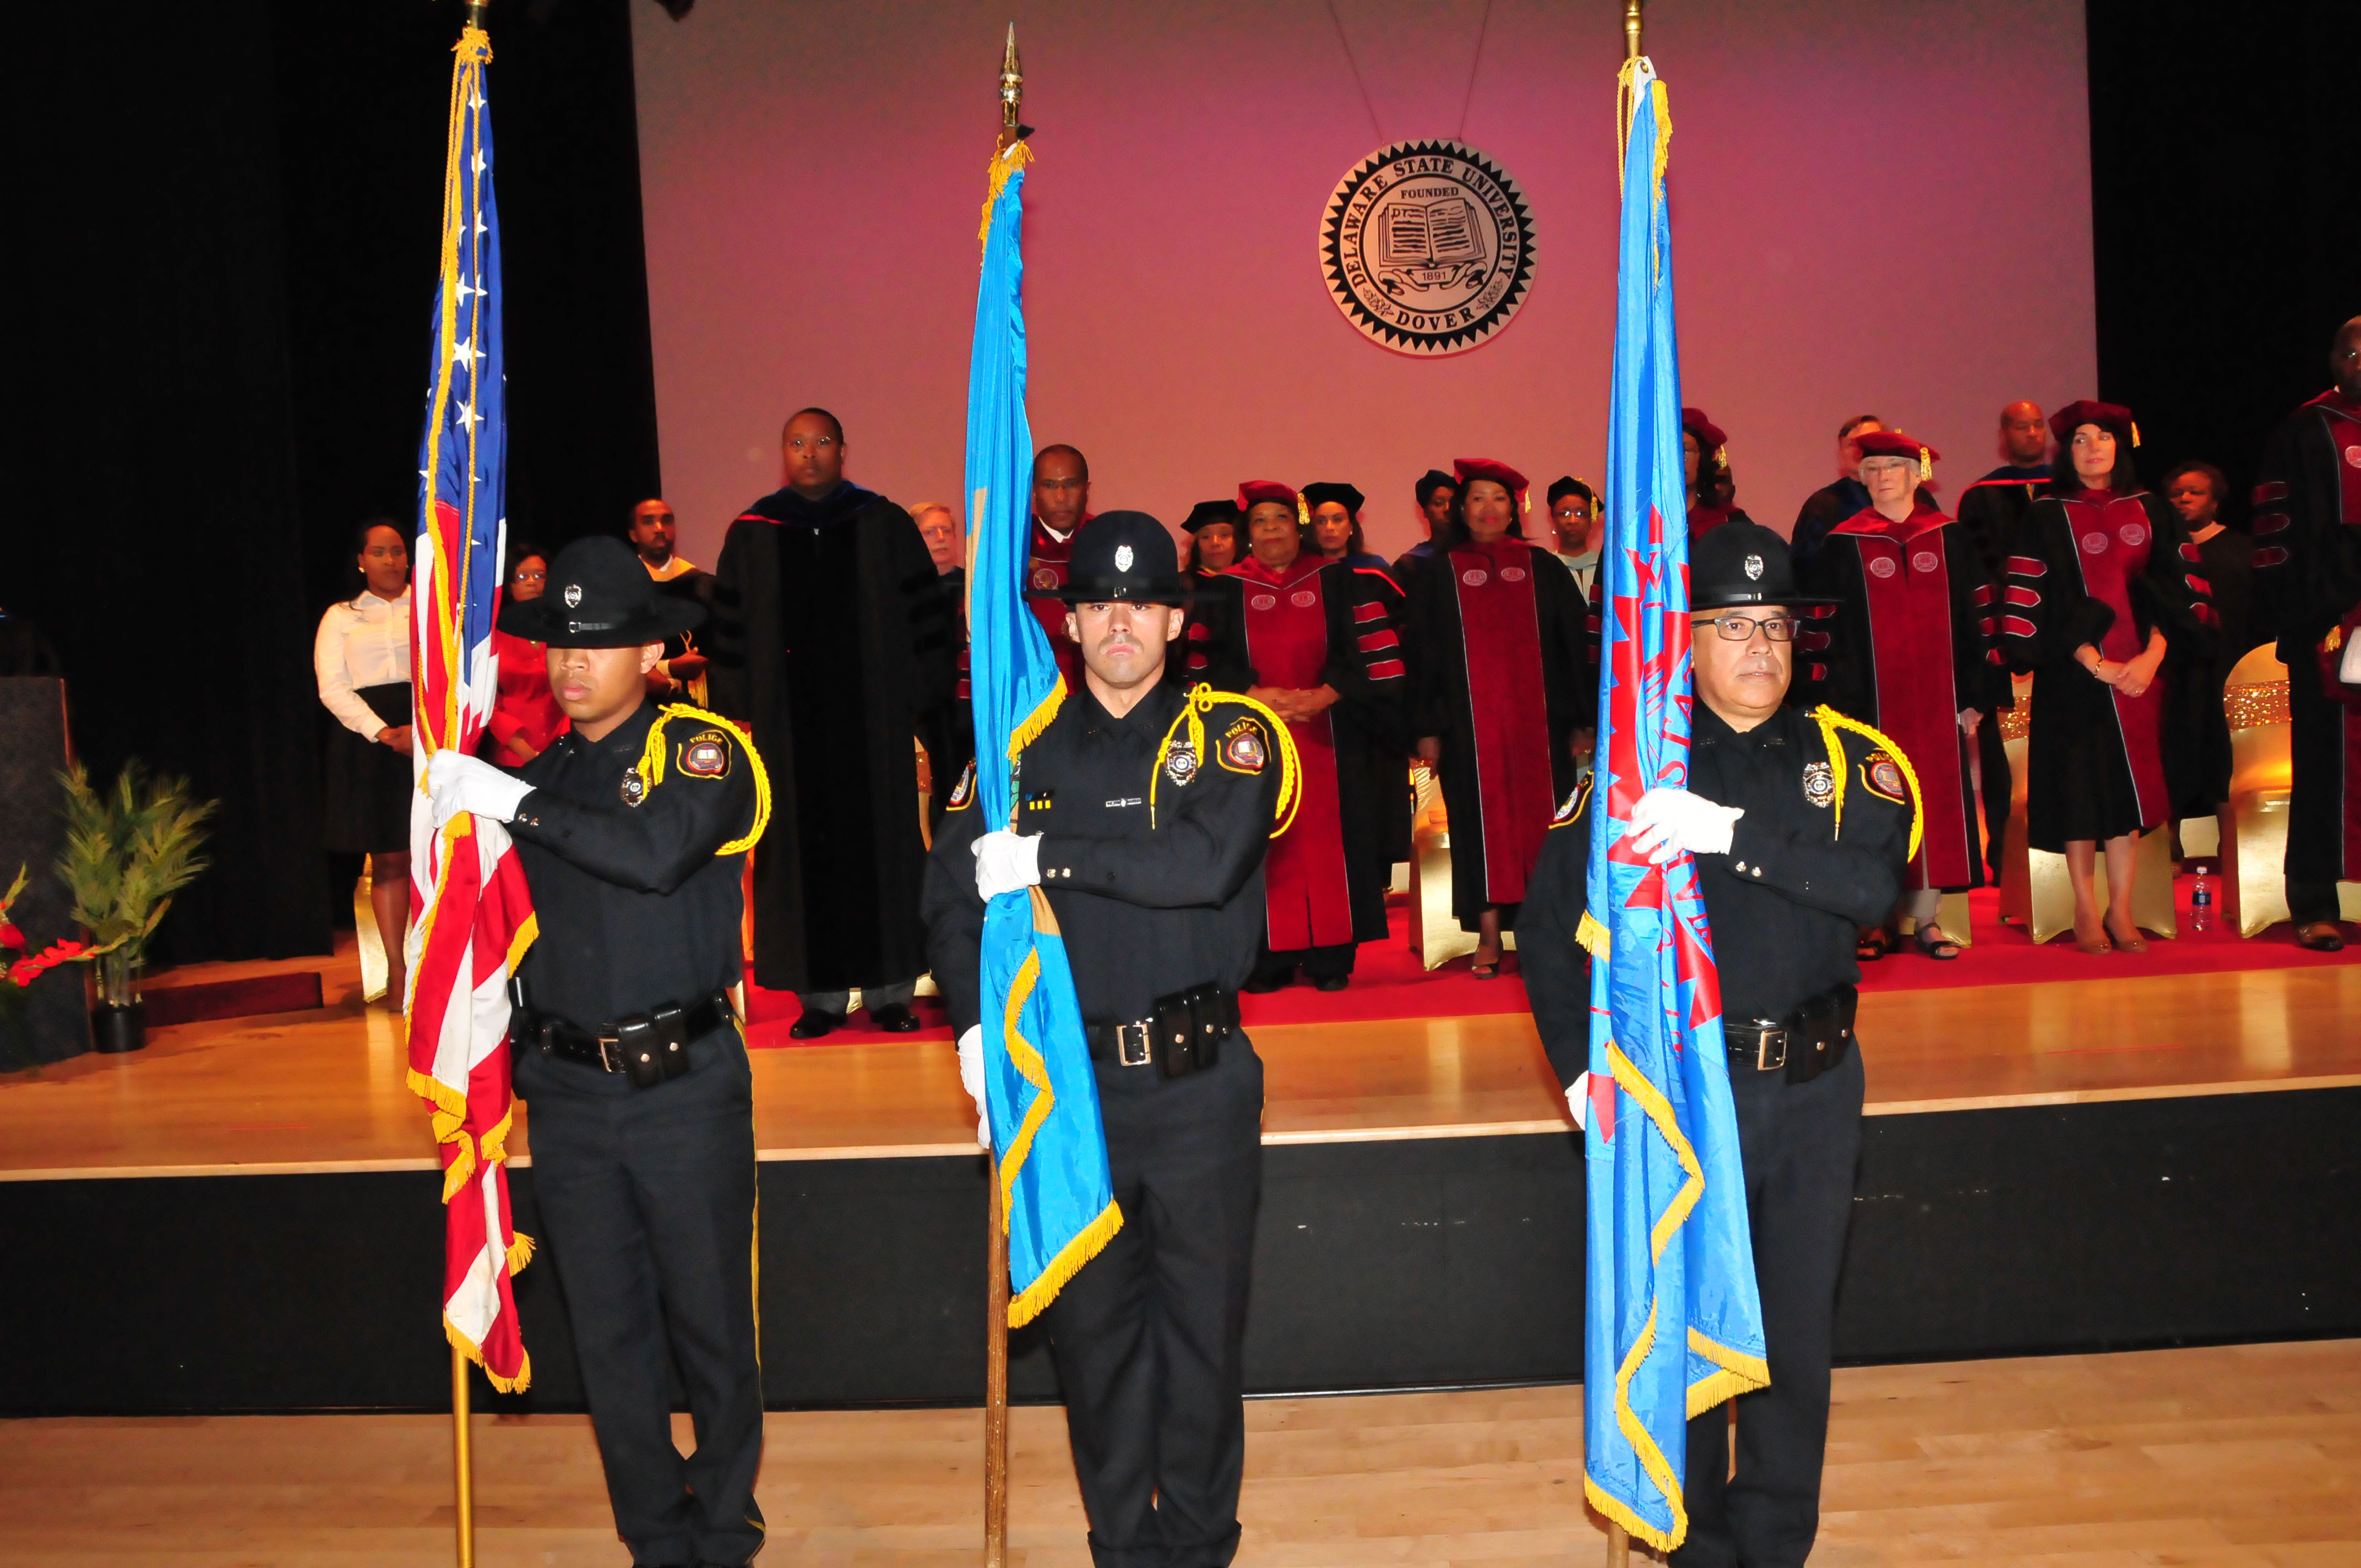 The DSU Police Honor Guard -- (l-r) Ptlm. Teddy Tyson, Ptlm. Anthony Sapienza and Ptlm. Jorge Camacho -- present the flags for the opening National Anthem during the Convocation Ceremony.